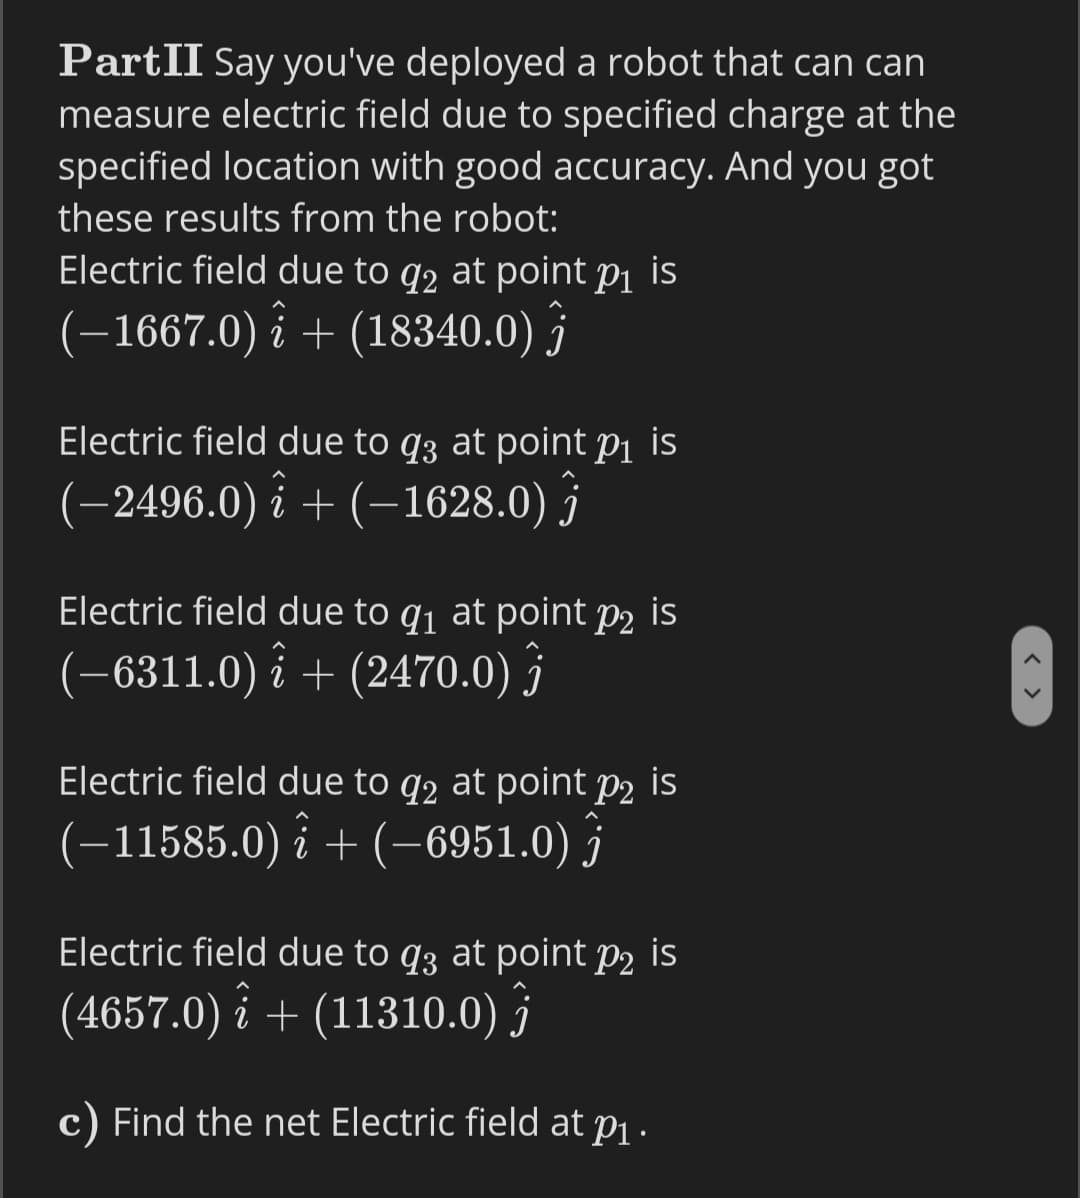 PartII Say you've deployed a robot that can can
measure electric field due to specified charge at the
specified location with good accuracy. And you got
these results from the robot:
Electric field due to q2 at point p1 is
(-1667.0) i + (18340.0) j
Electric field due to q3 at point p1 is
(-2496.0) i + (–1628.0) j
Electric field due to q1 at point p2 is
(-6311.0) î + (2470.0) }
Electric field due to q2 at point p2 is
(-11585.0) î + (–6951.0) ĵ
Electric field due to q3 at point p2 is
(4657.0) î + (11310.0) }
c) Find the net Electric field at pj .
< >
